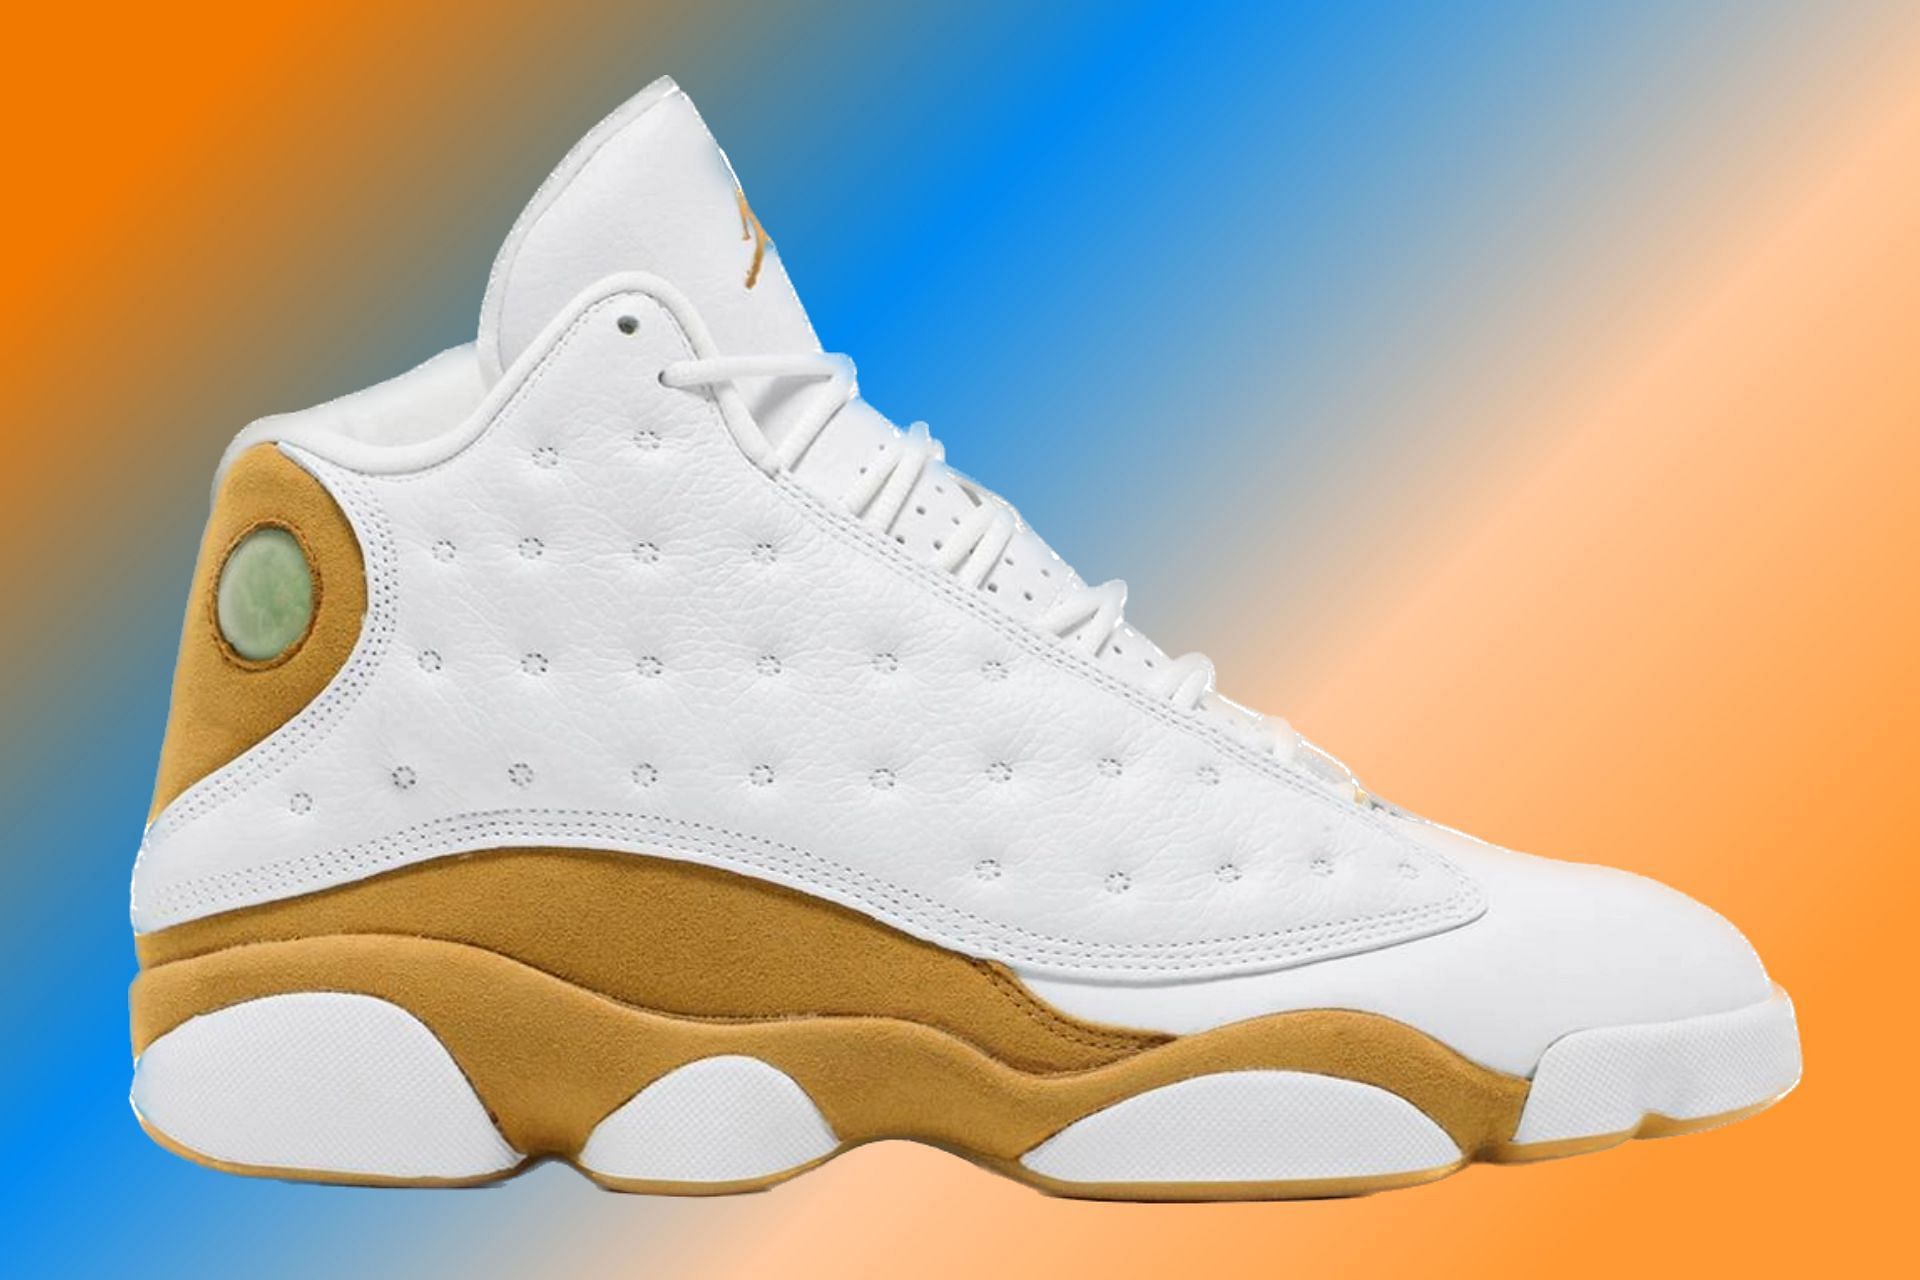 Wheat: Nike's Jordan 13 "Wheat" shoes: to buy, price, and more details